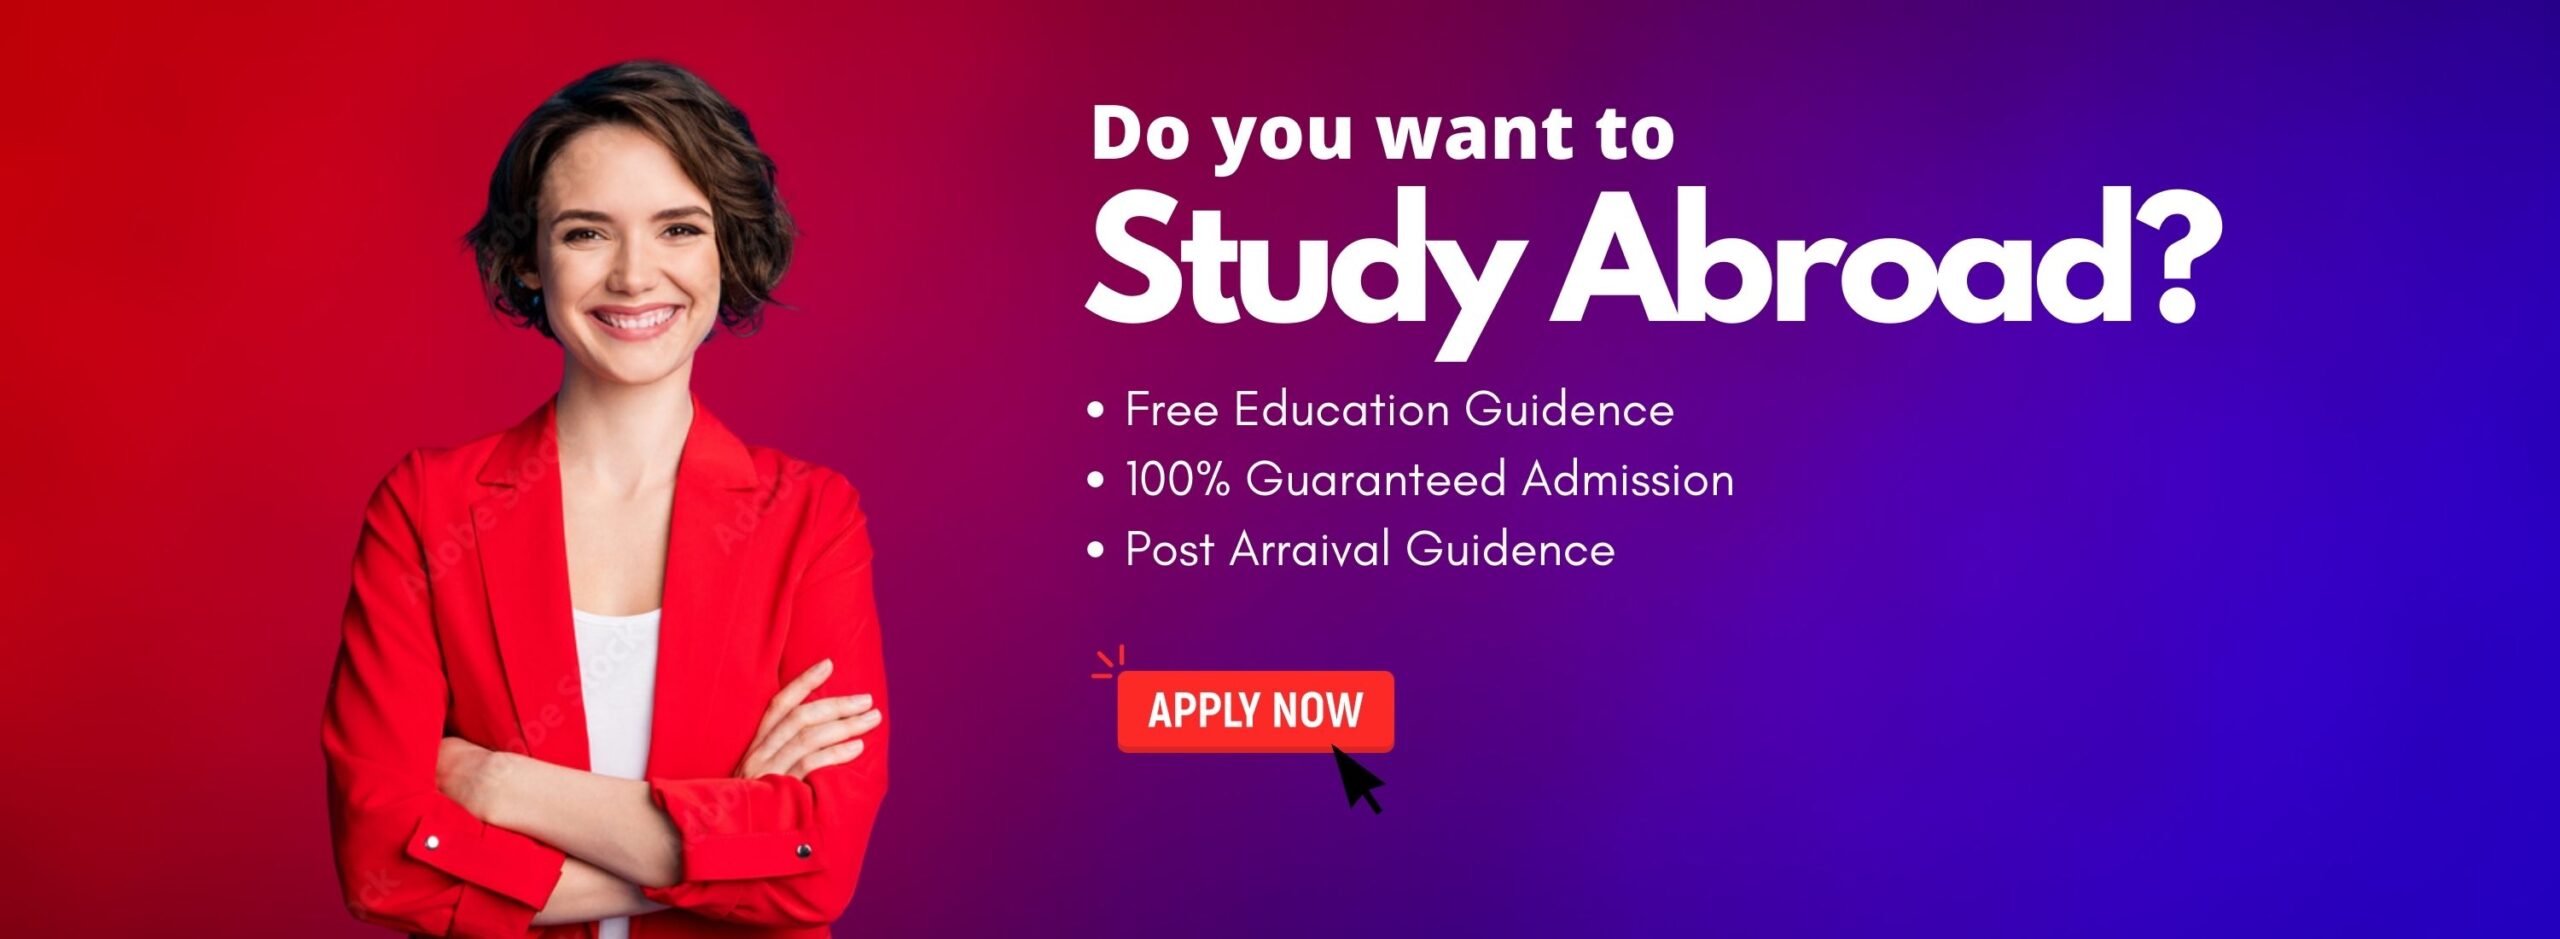 Study Abroad Consultants - KCR Consultants